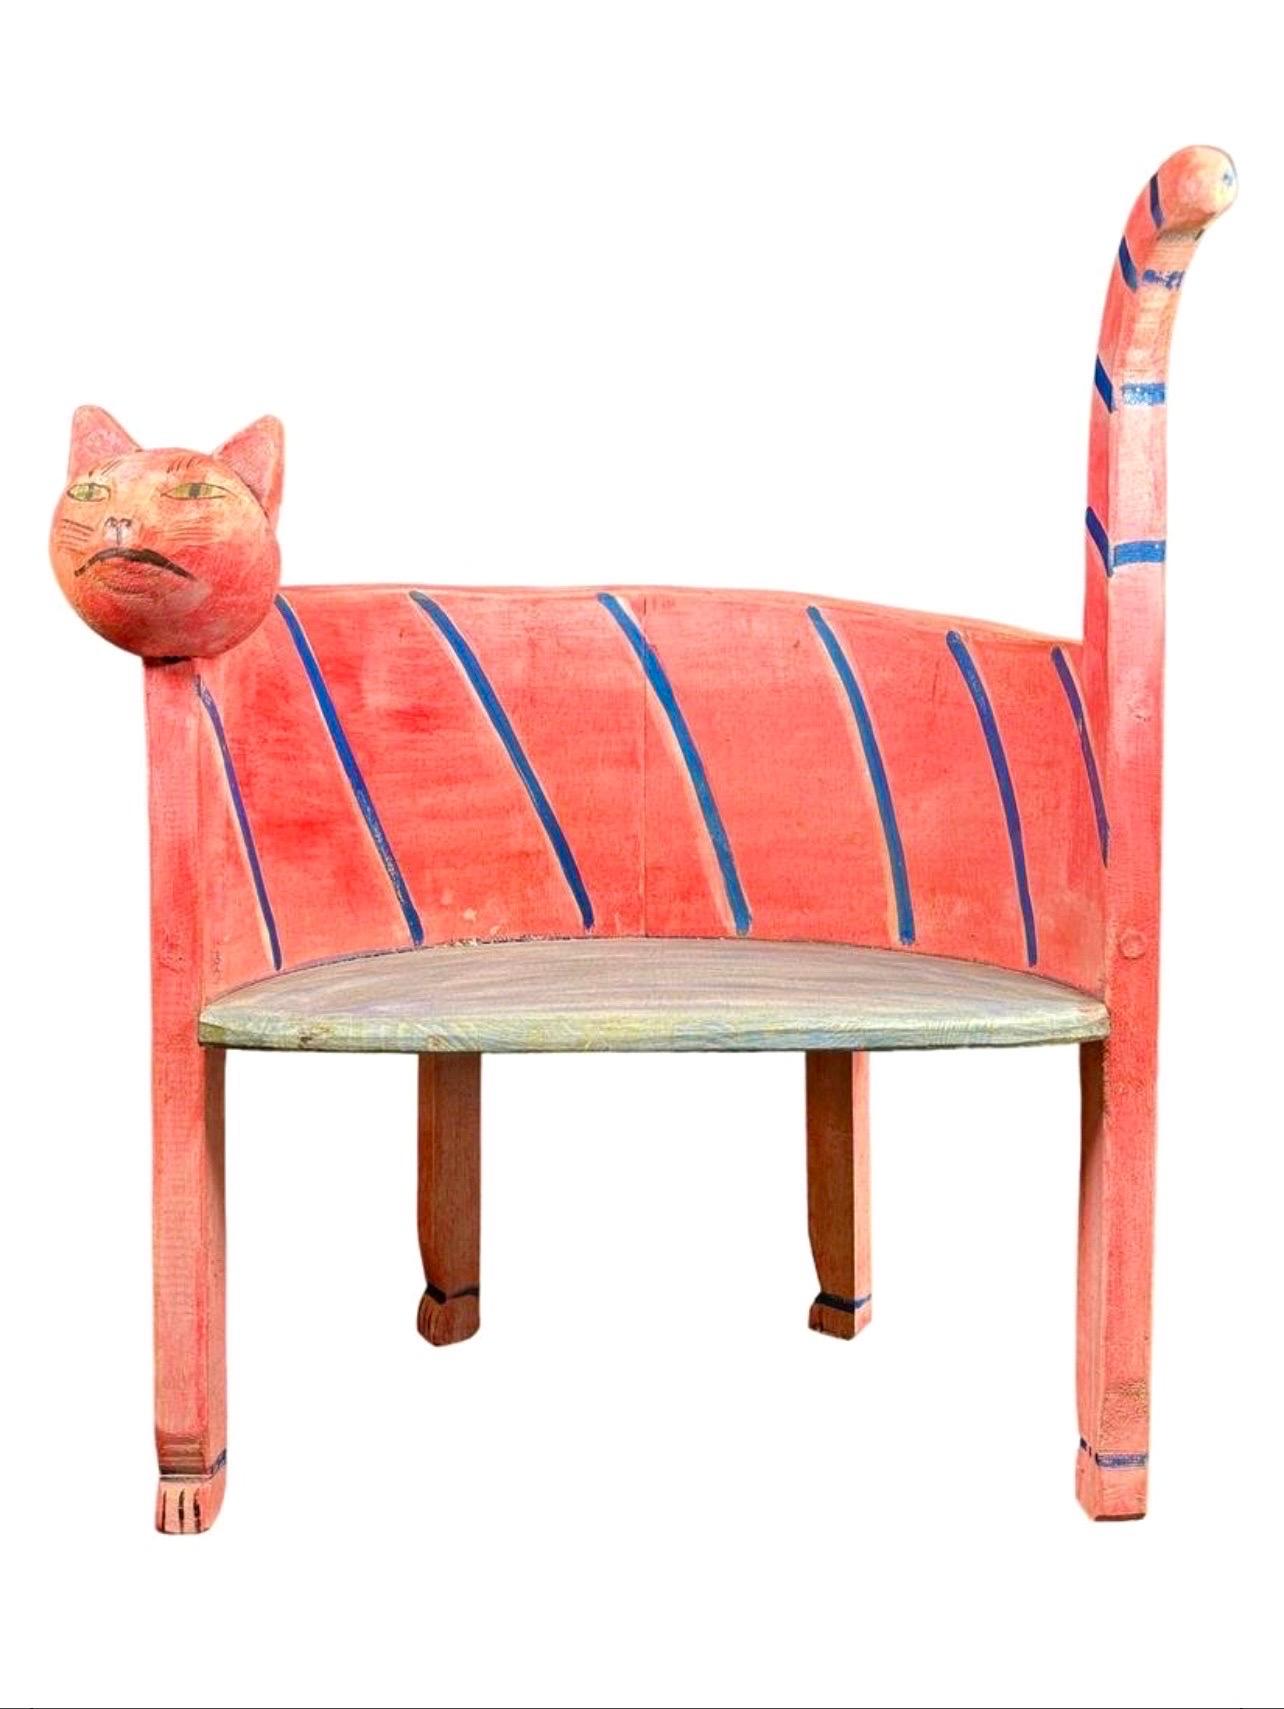 Gerard Rigot (France, 1929-) 
Animeubles, Child's Chair
Circa, 1980's
Folk art, hand carved chair in the form of a cat. 
Hand signed on bottom
Endorsed by the Musee des Arts Decoratifs, Paris. 
Dimensions: Measures 23" x 19" x 13"

The chair is made